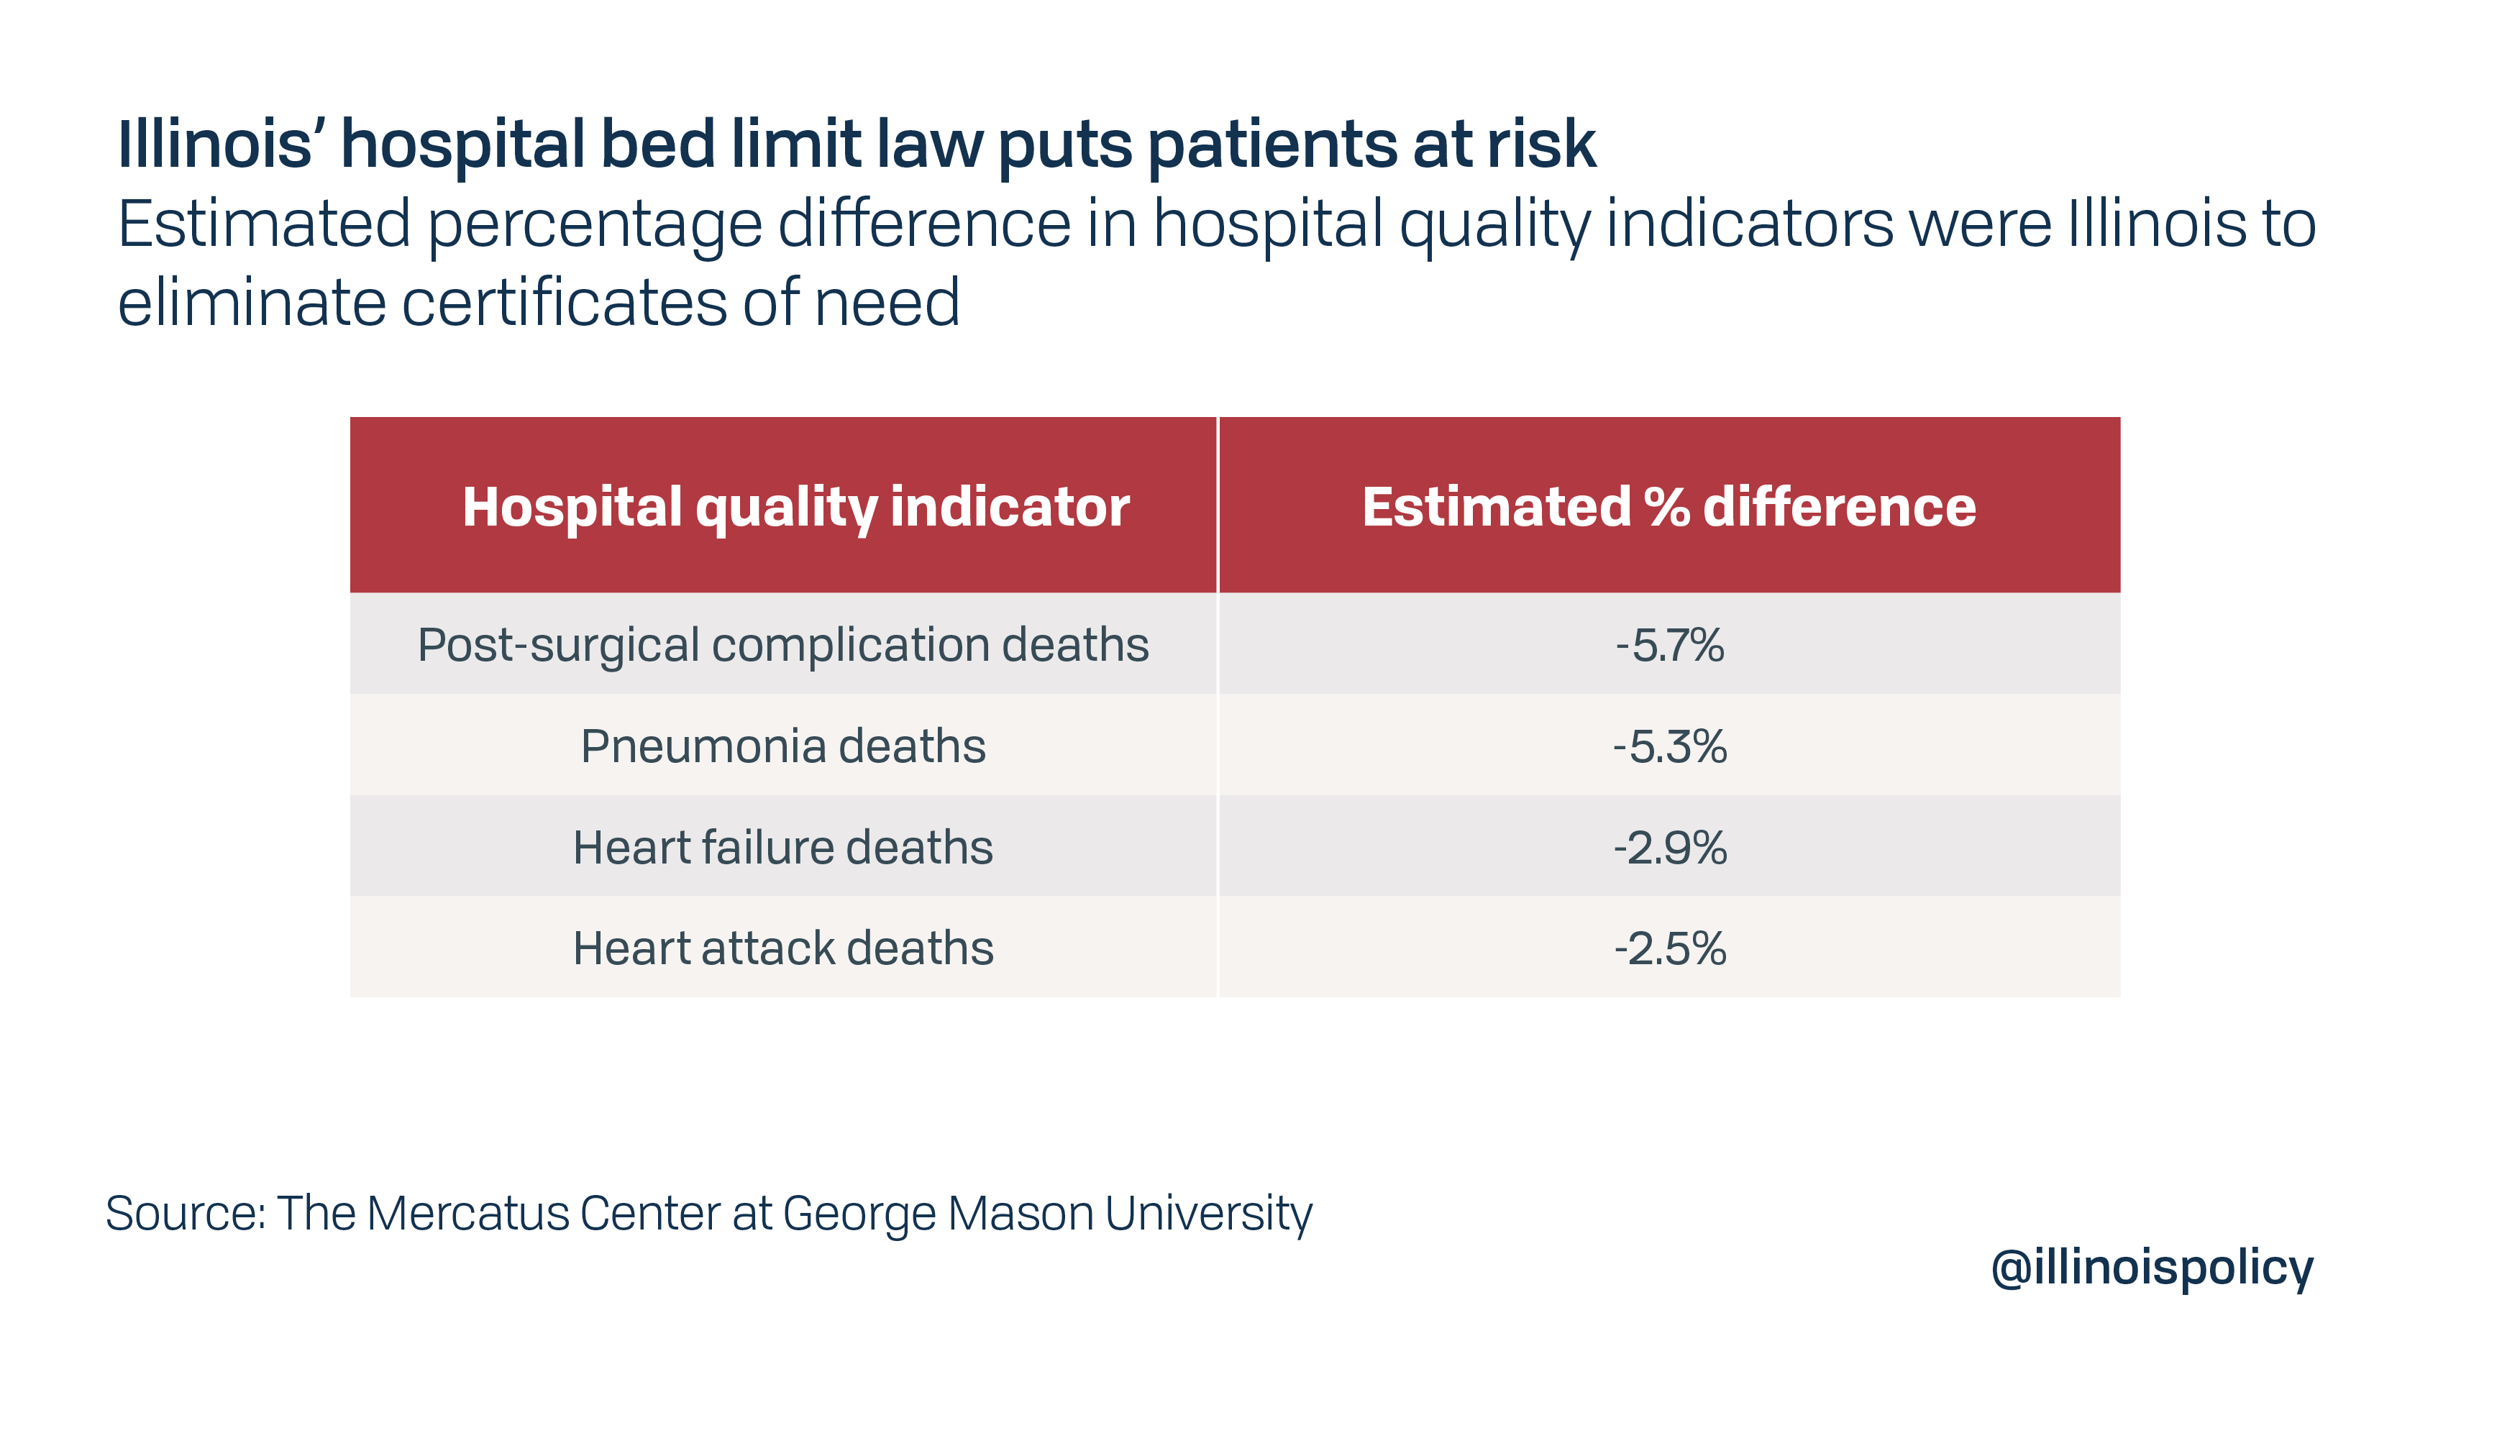 Illinois' hospital bed limit law puts patients at risk